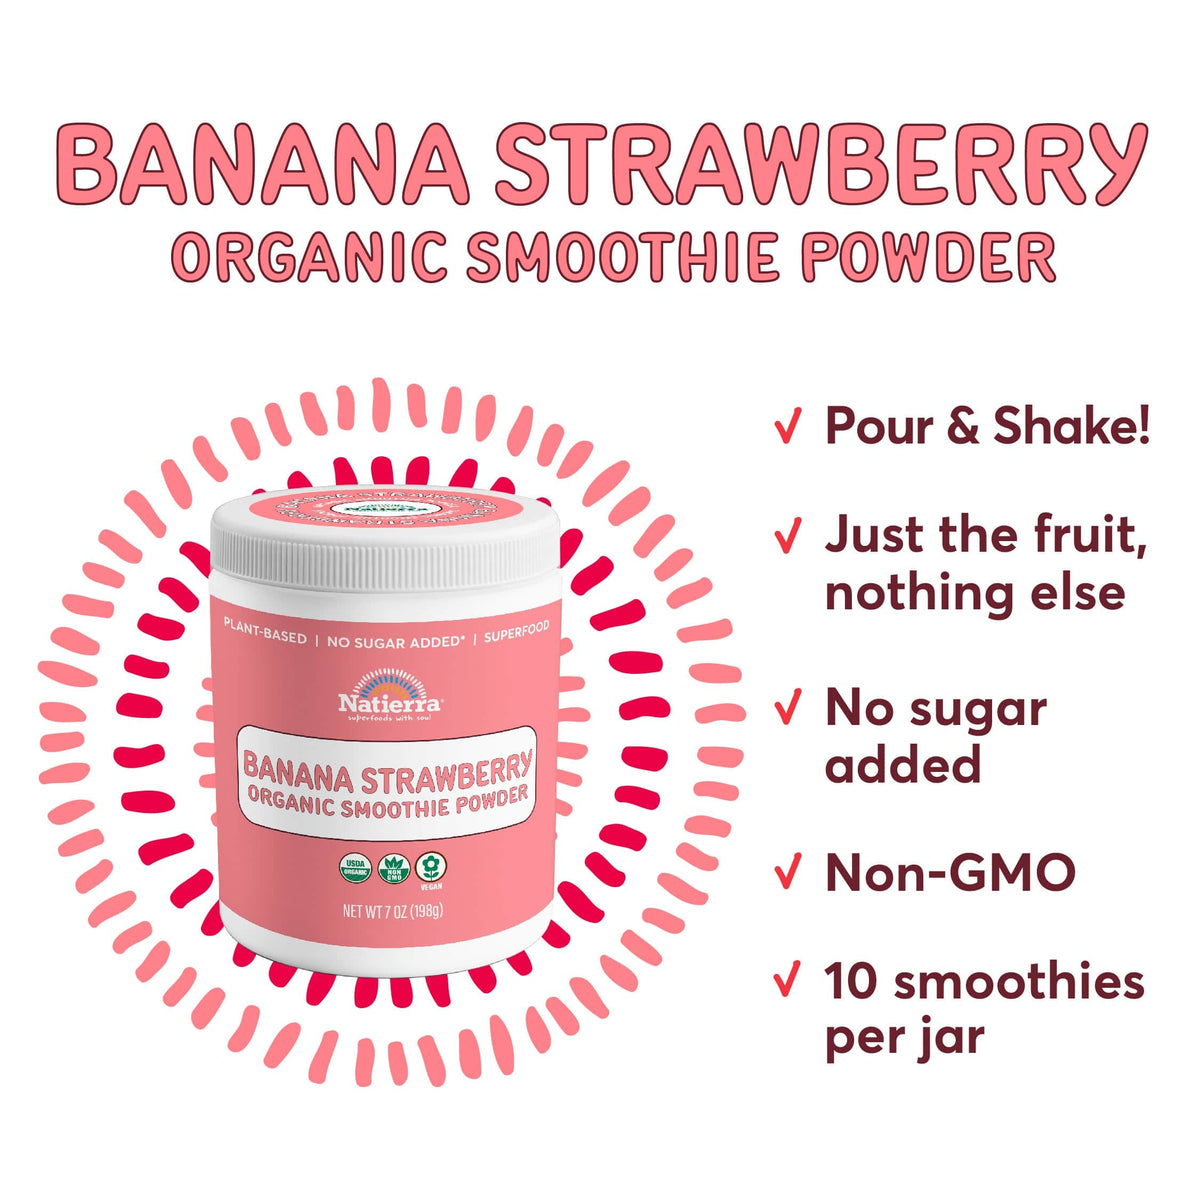 A jar of Natierra Banana Strawberry Organic Smoothie Powder next to list of main product claims